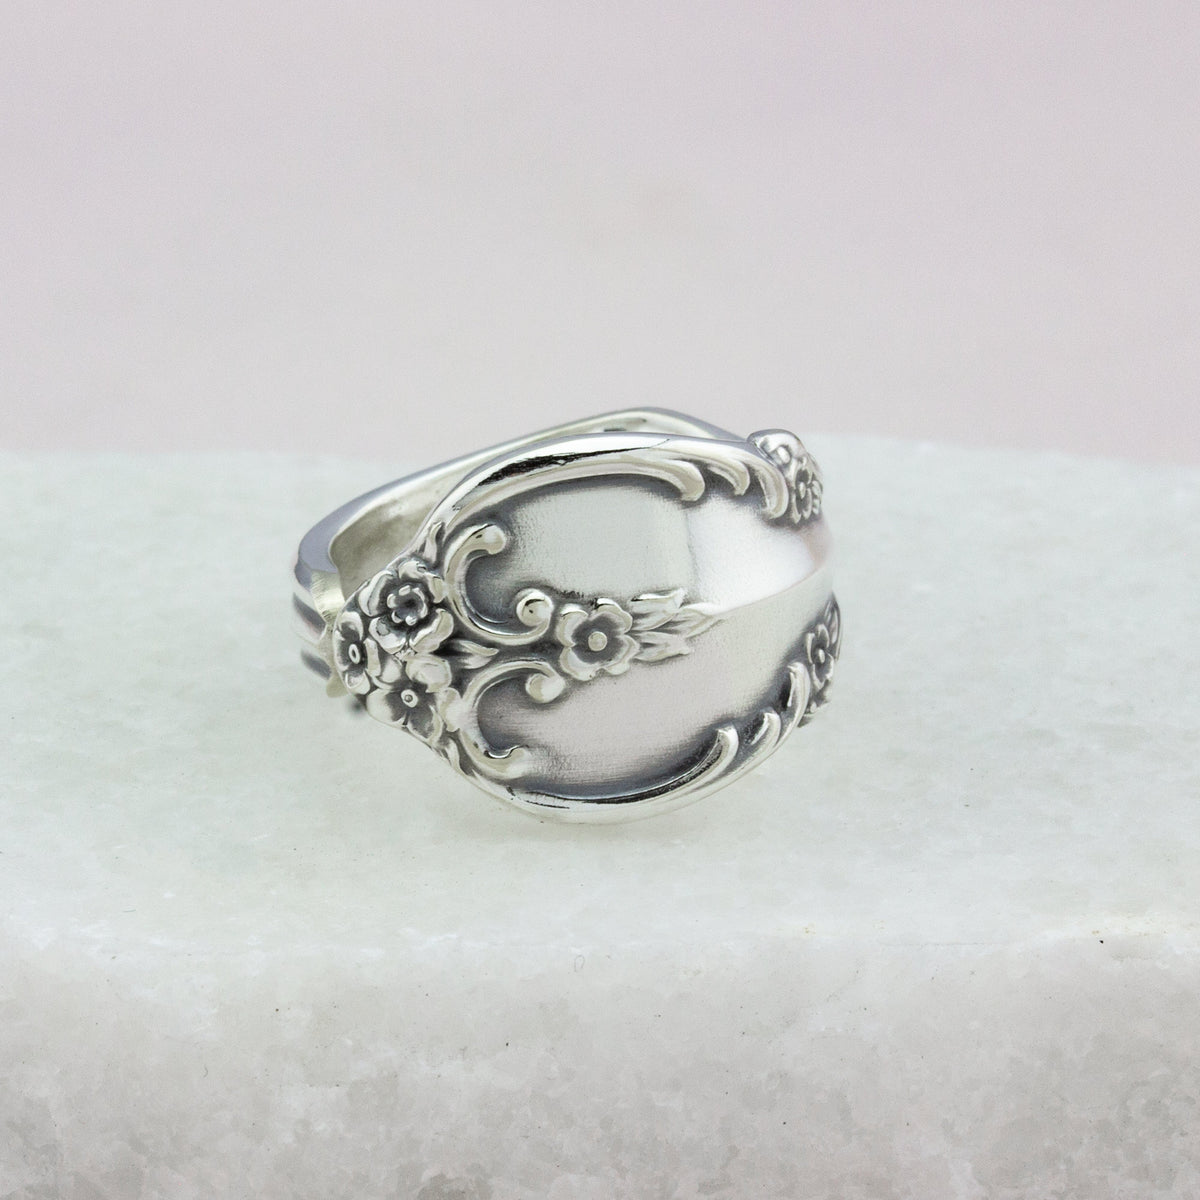 Antique Spoon Ring Jewelry Vintage Silverware Spoon Rings Handmade Authentic Silverware Jewelry 1962 Southern Splendor Mothers Day Gift